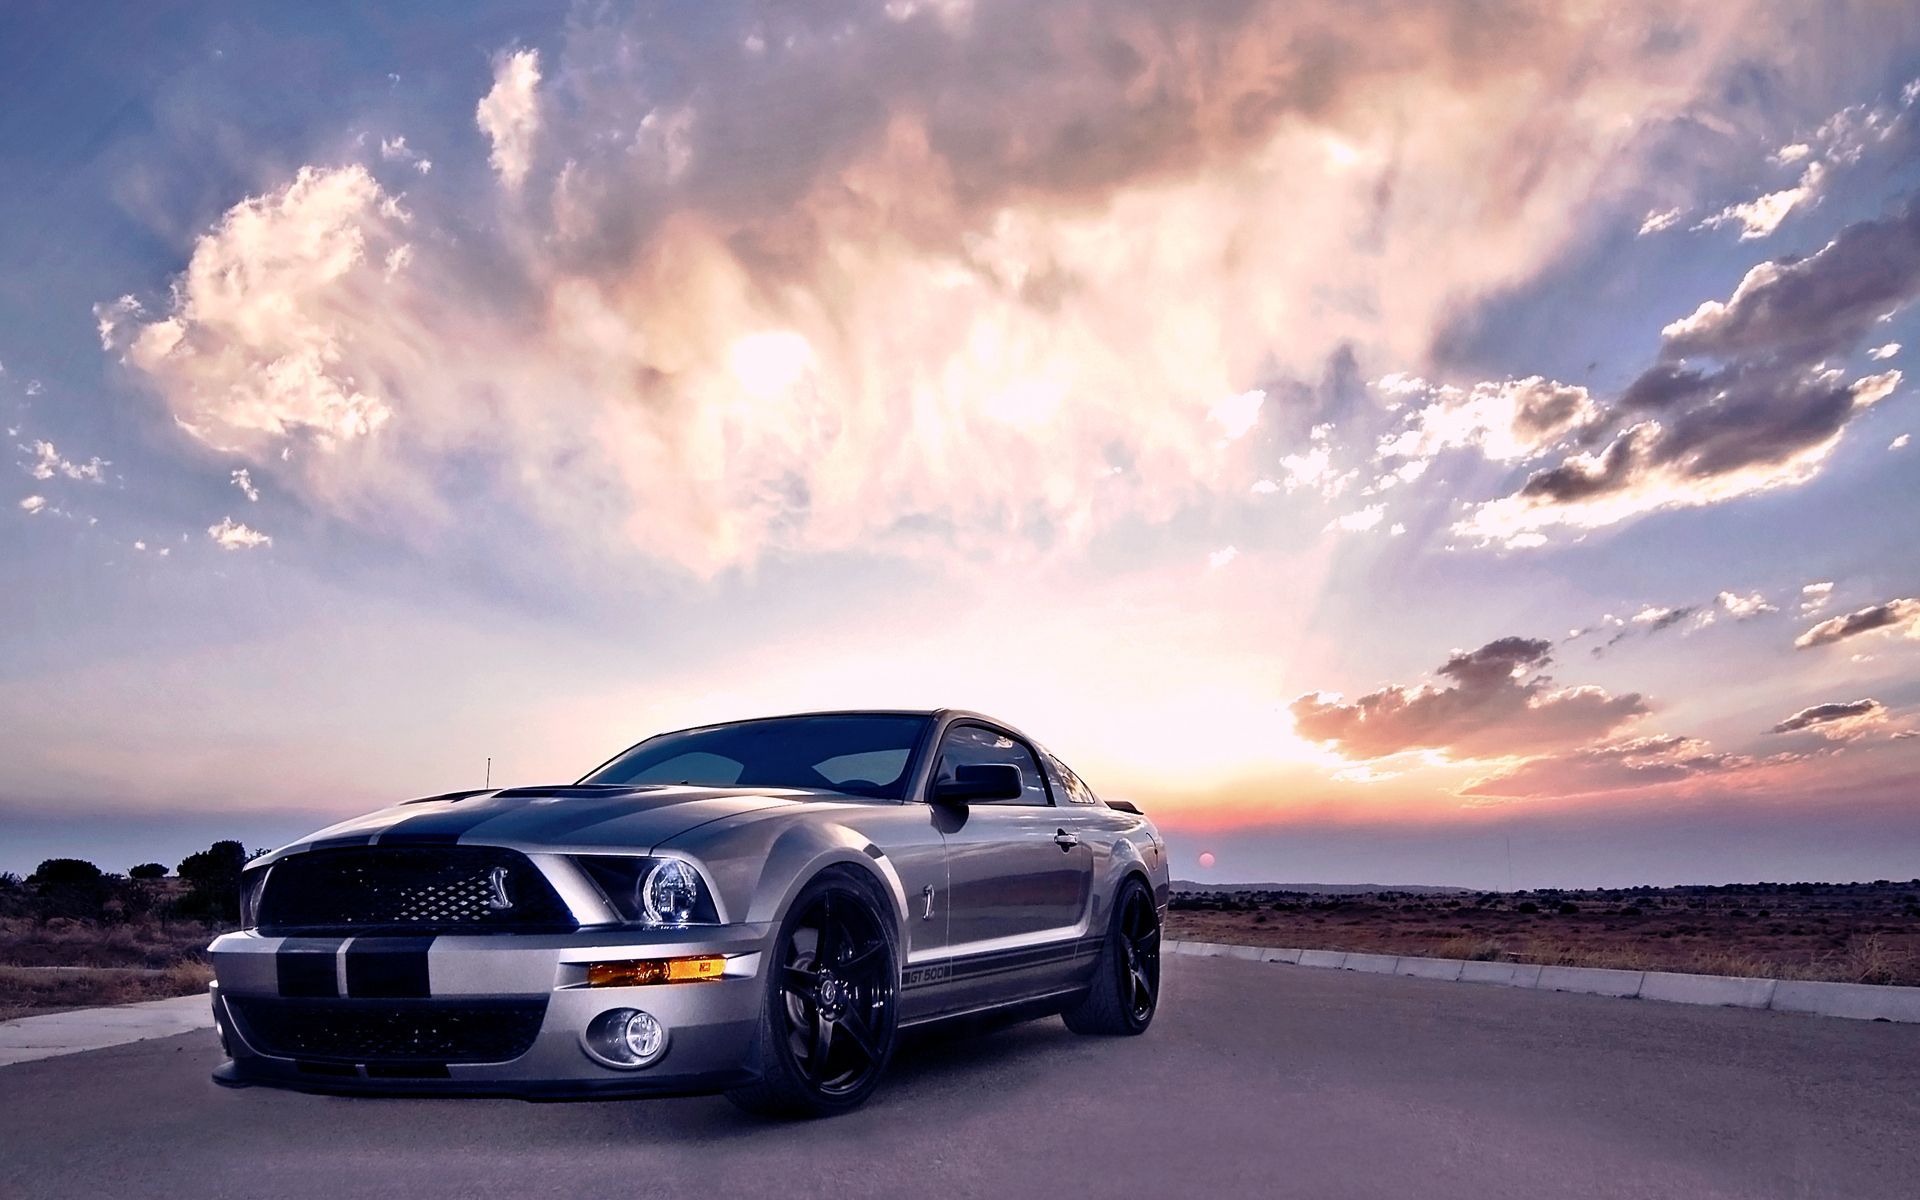 Excellent Ford Mustang Shelby Wallpaper | Full HD Pictures